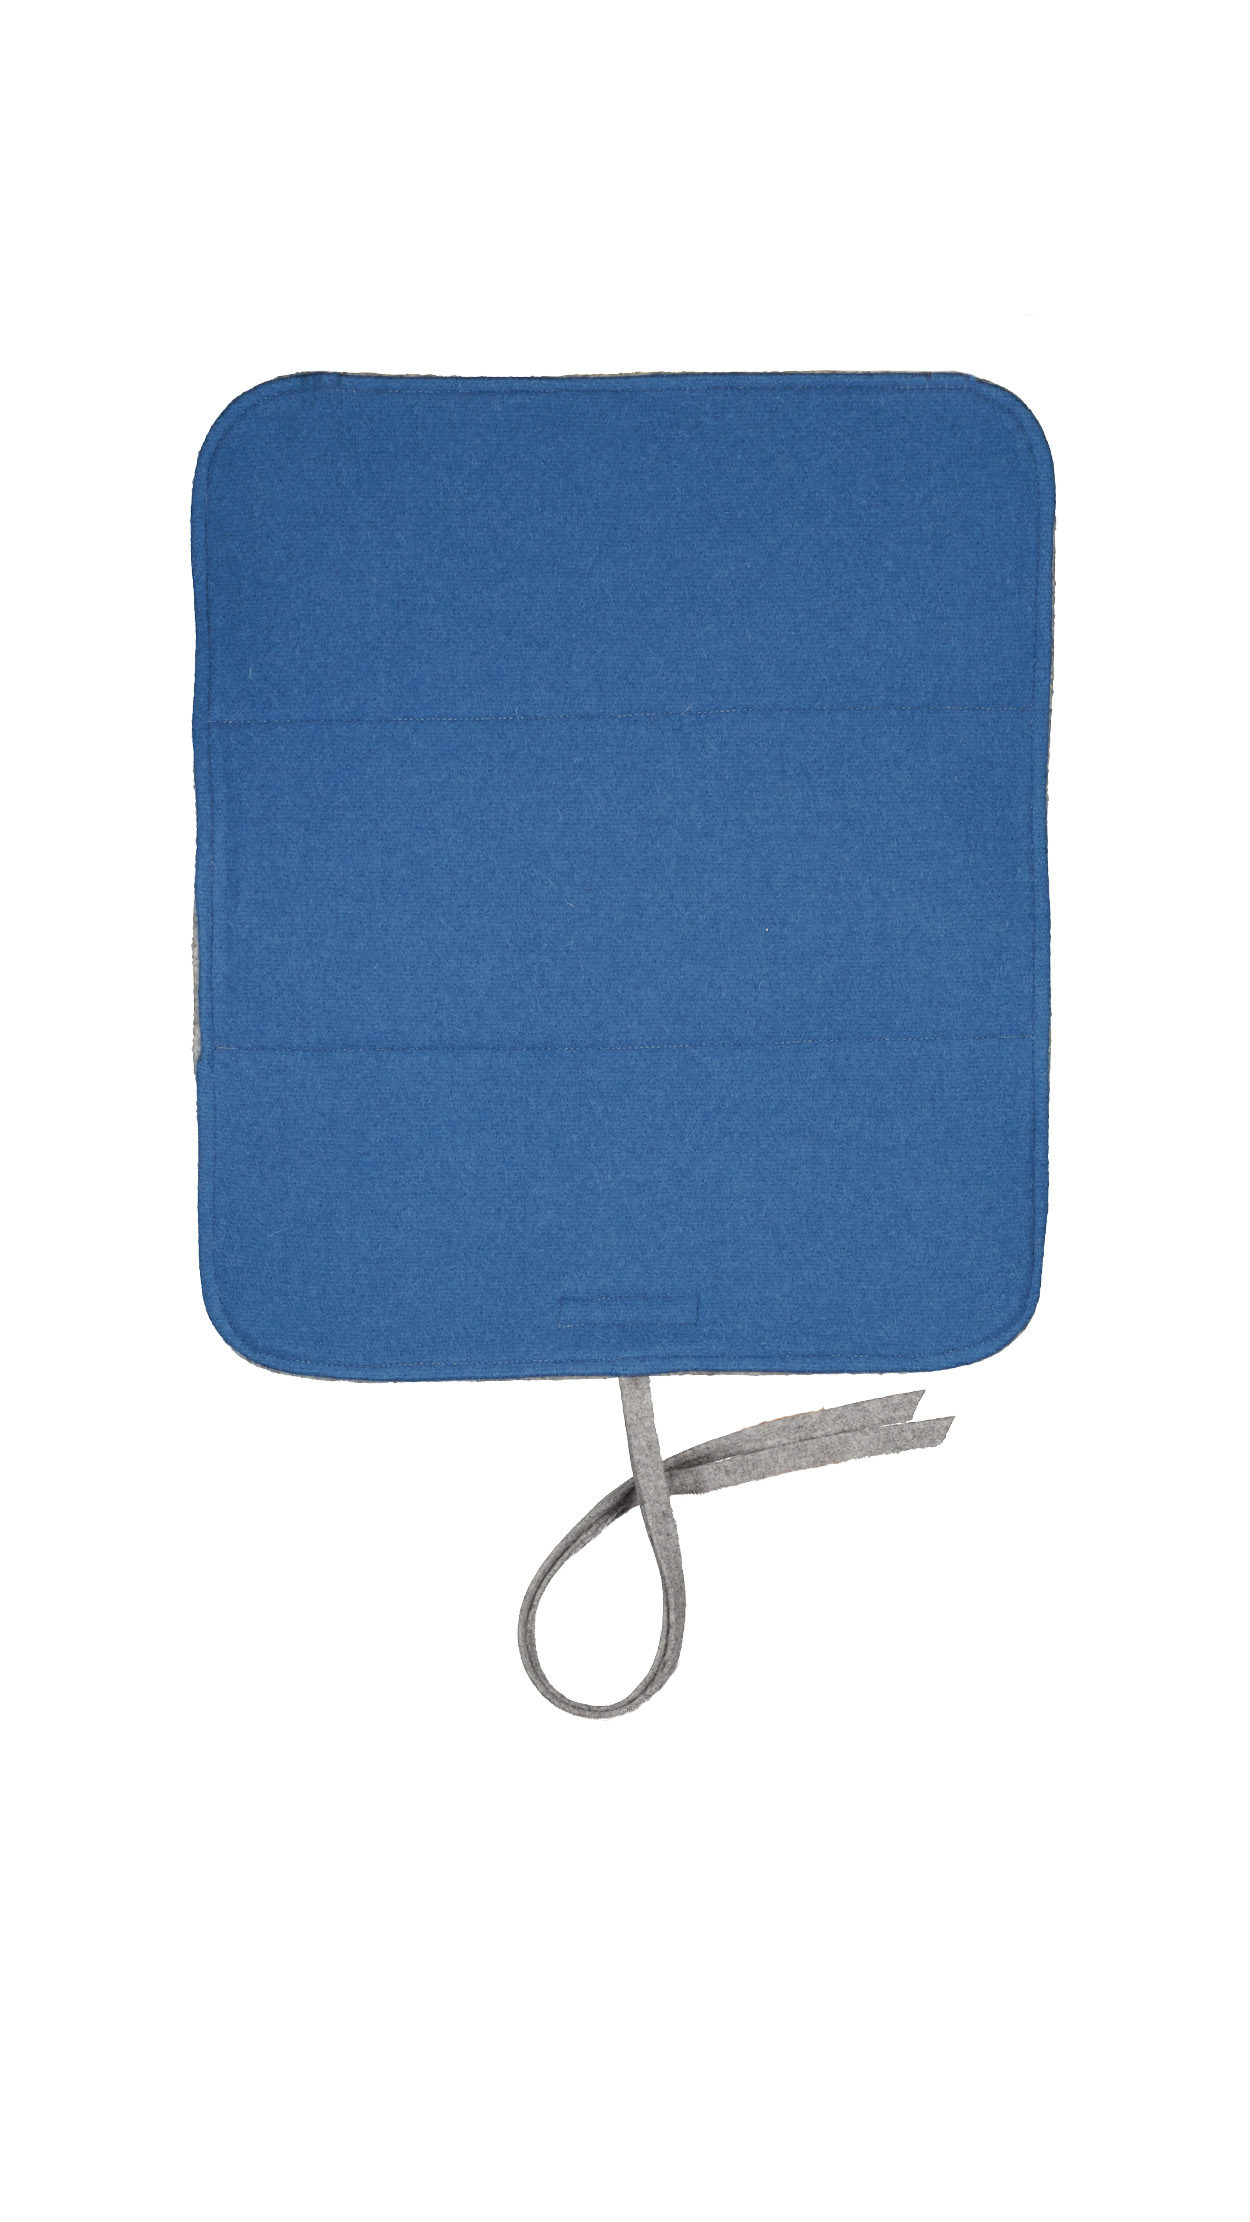 Loden Seat Pad